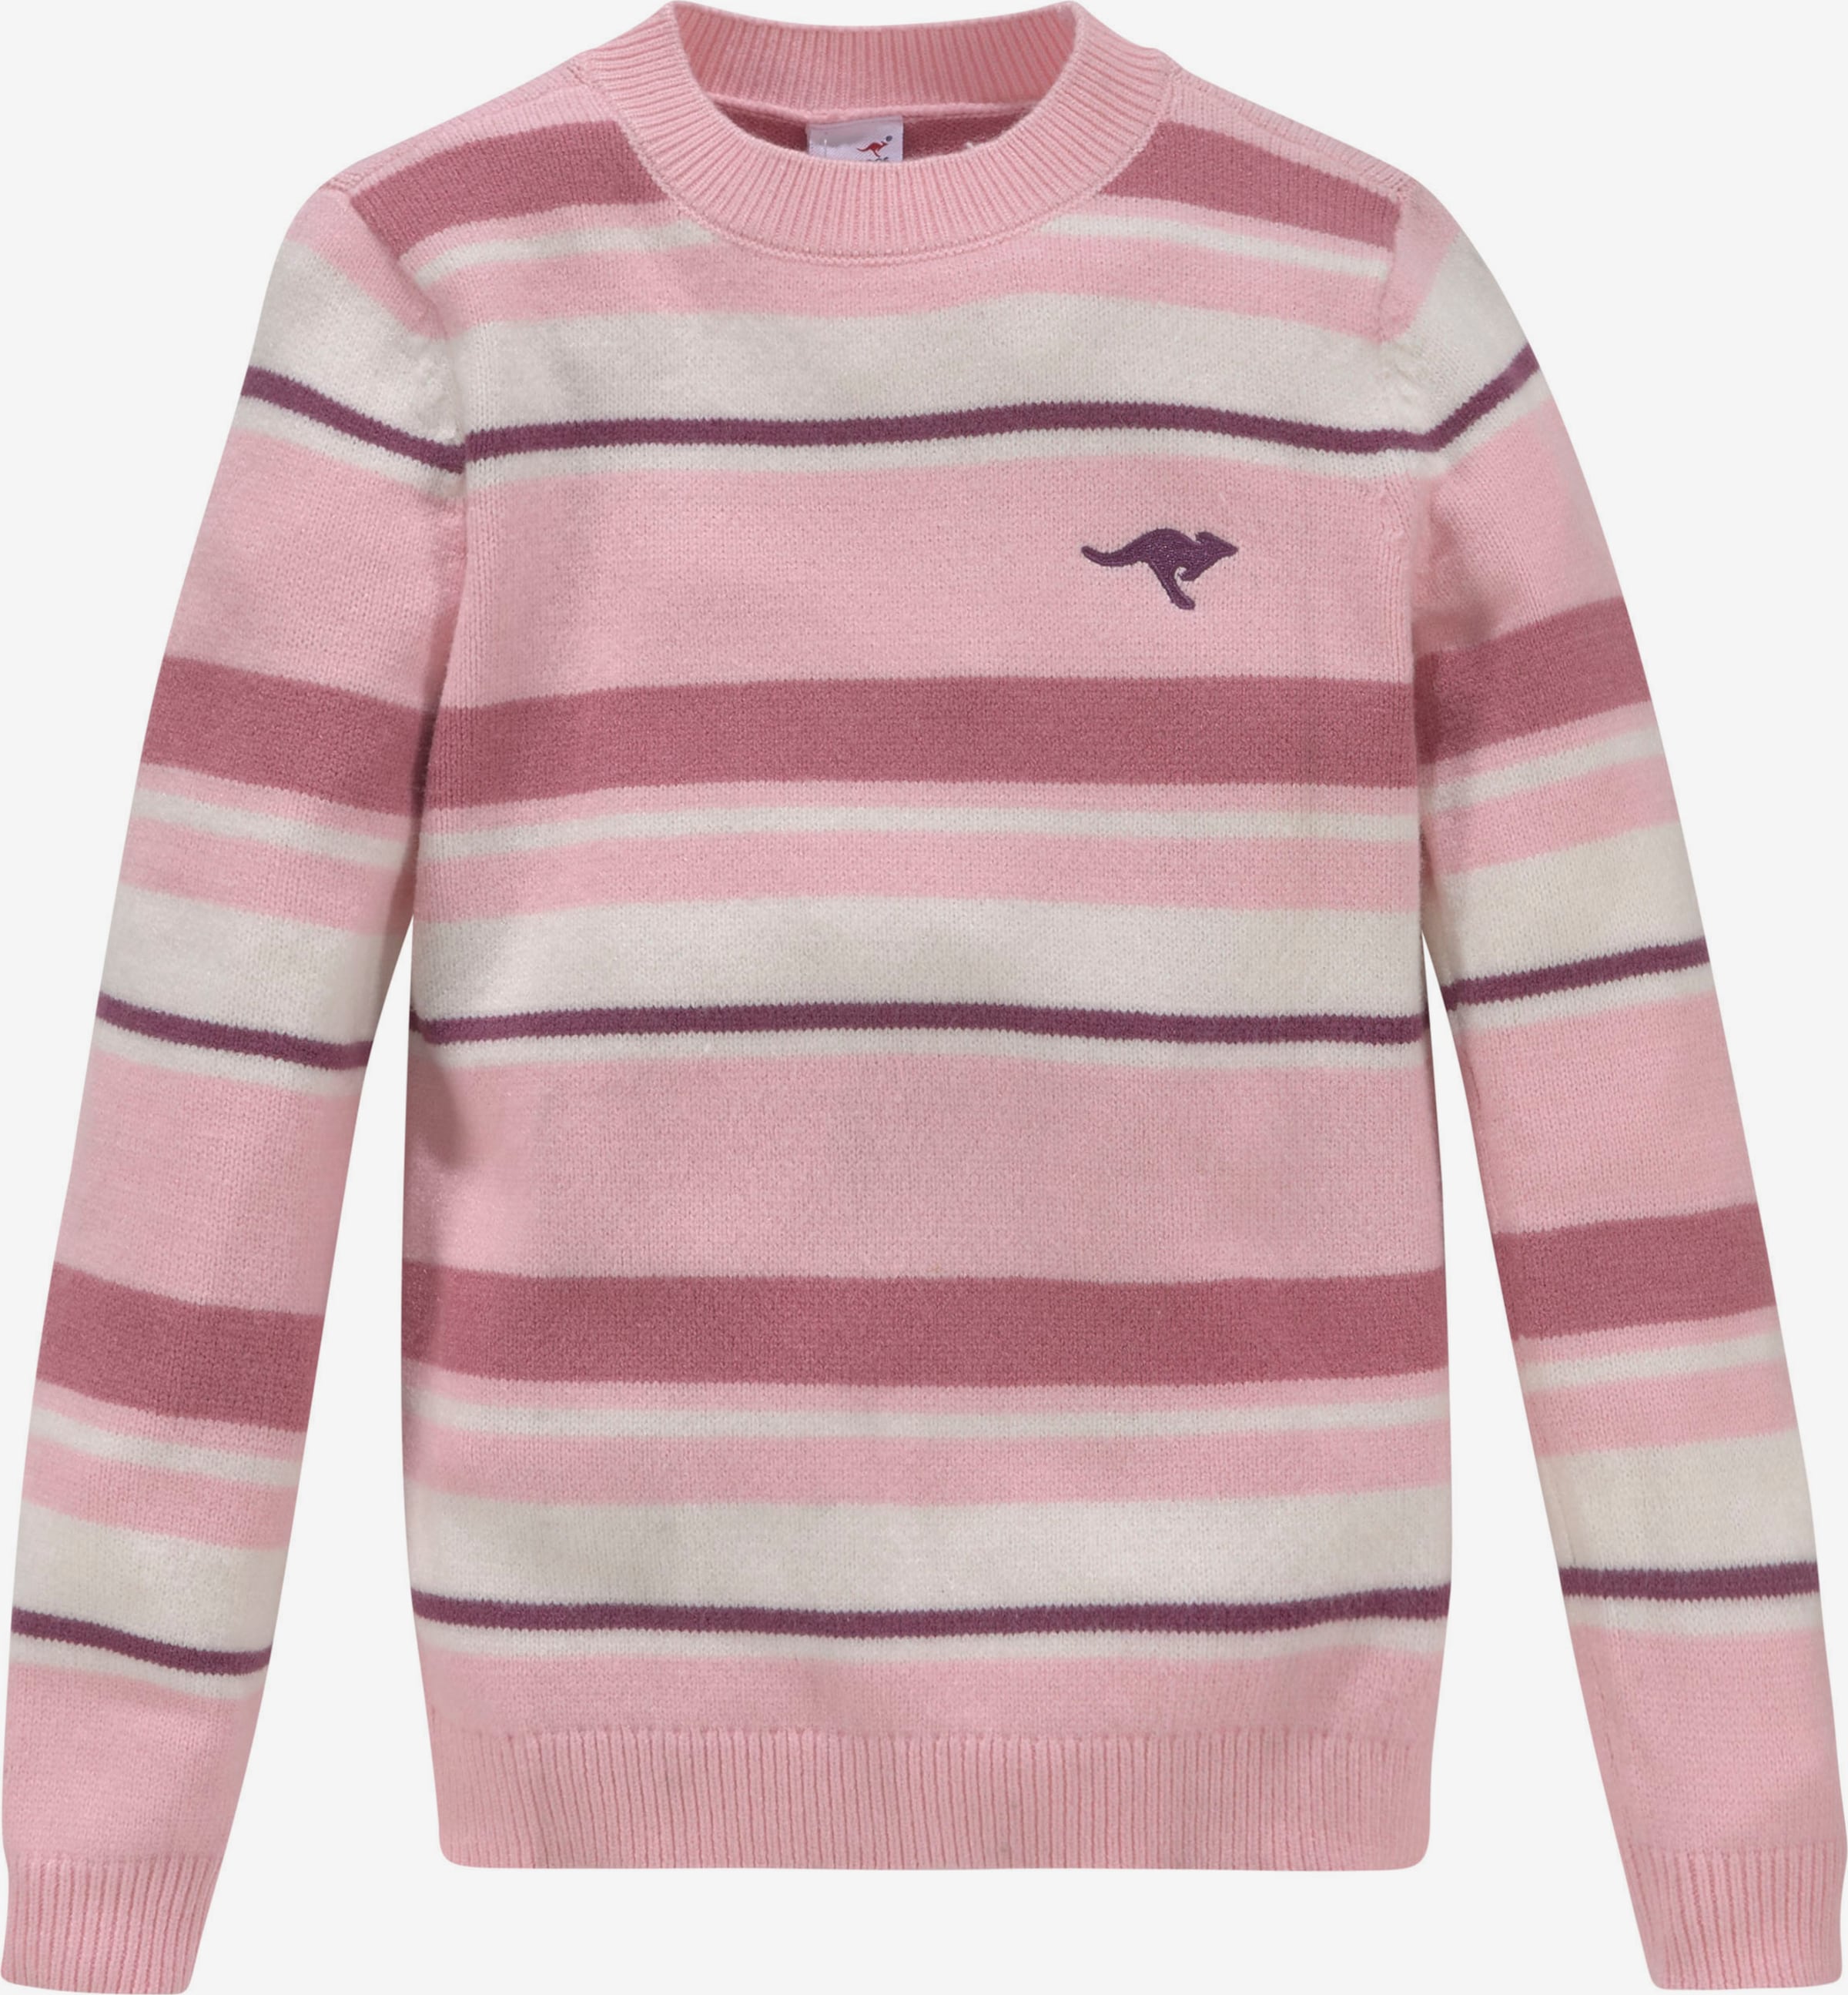 KangaROOS Pullover in Rosa, Altrosa | ABOUT YOU